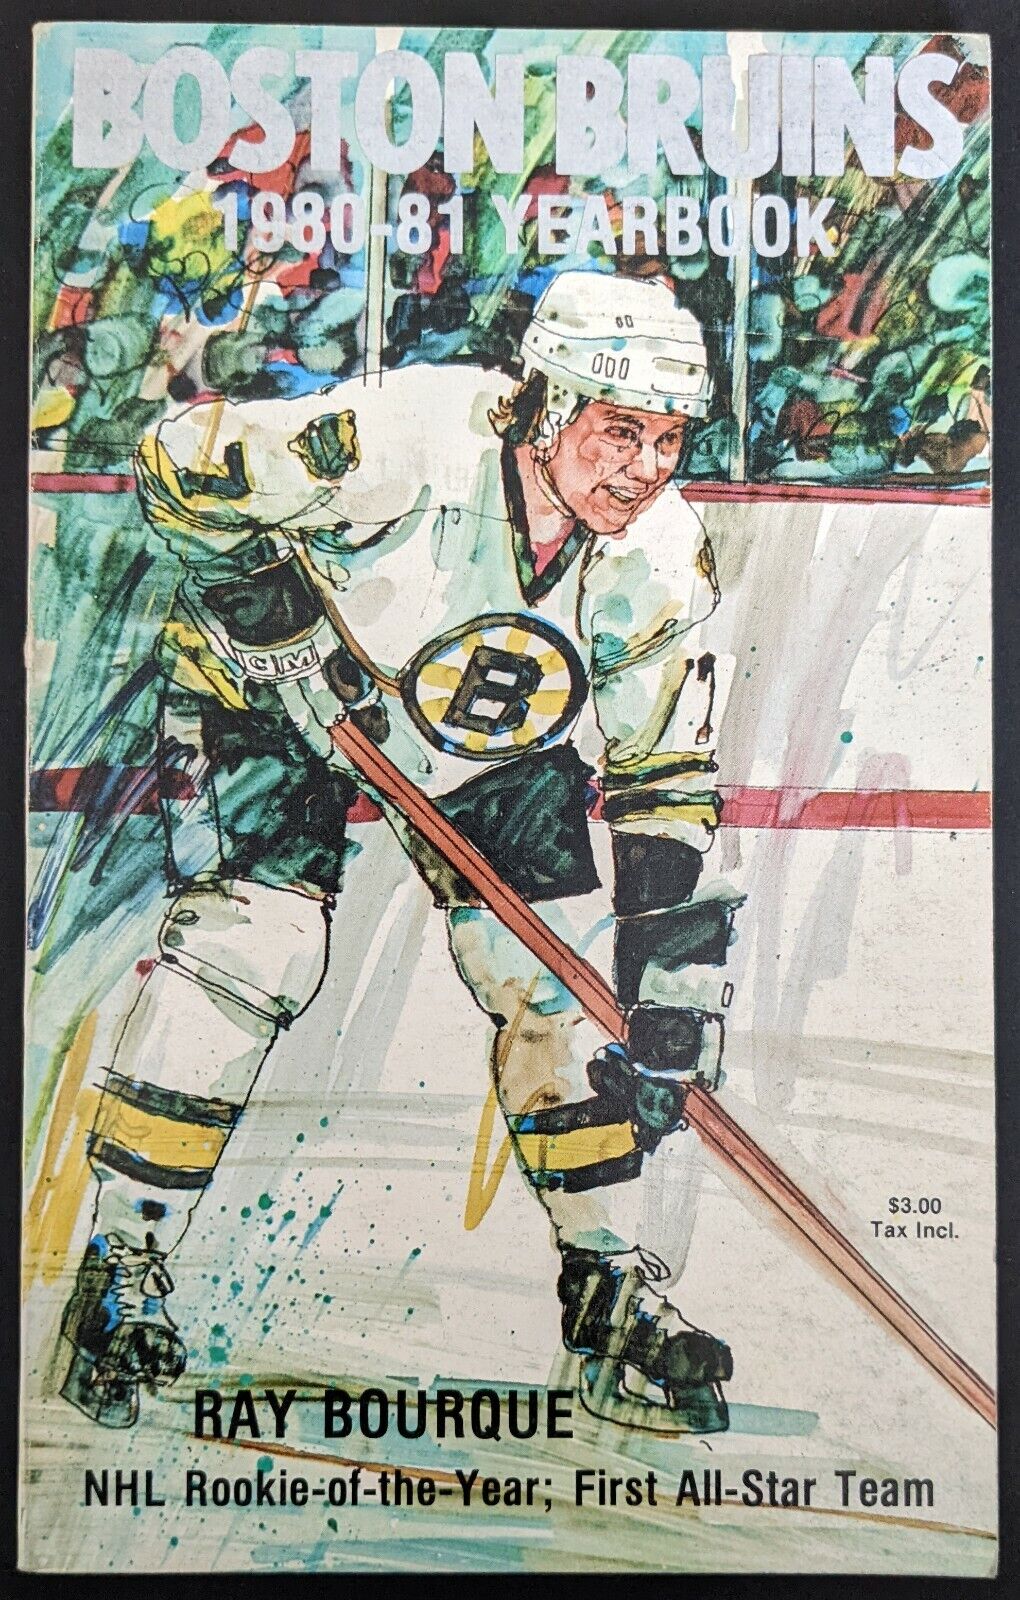 1980-81 Boston Bruins Media Guide Ray Bourque Rookie of the Year Cover NHL VTG